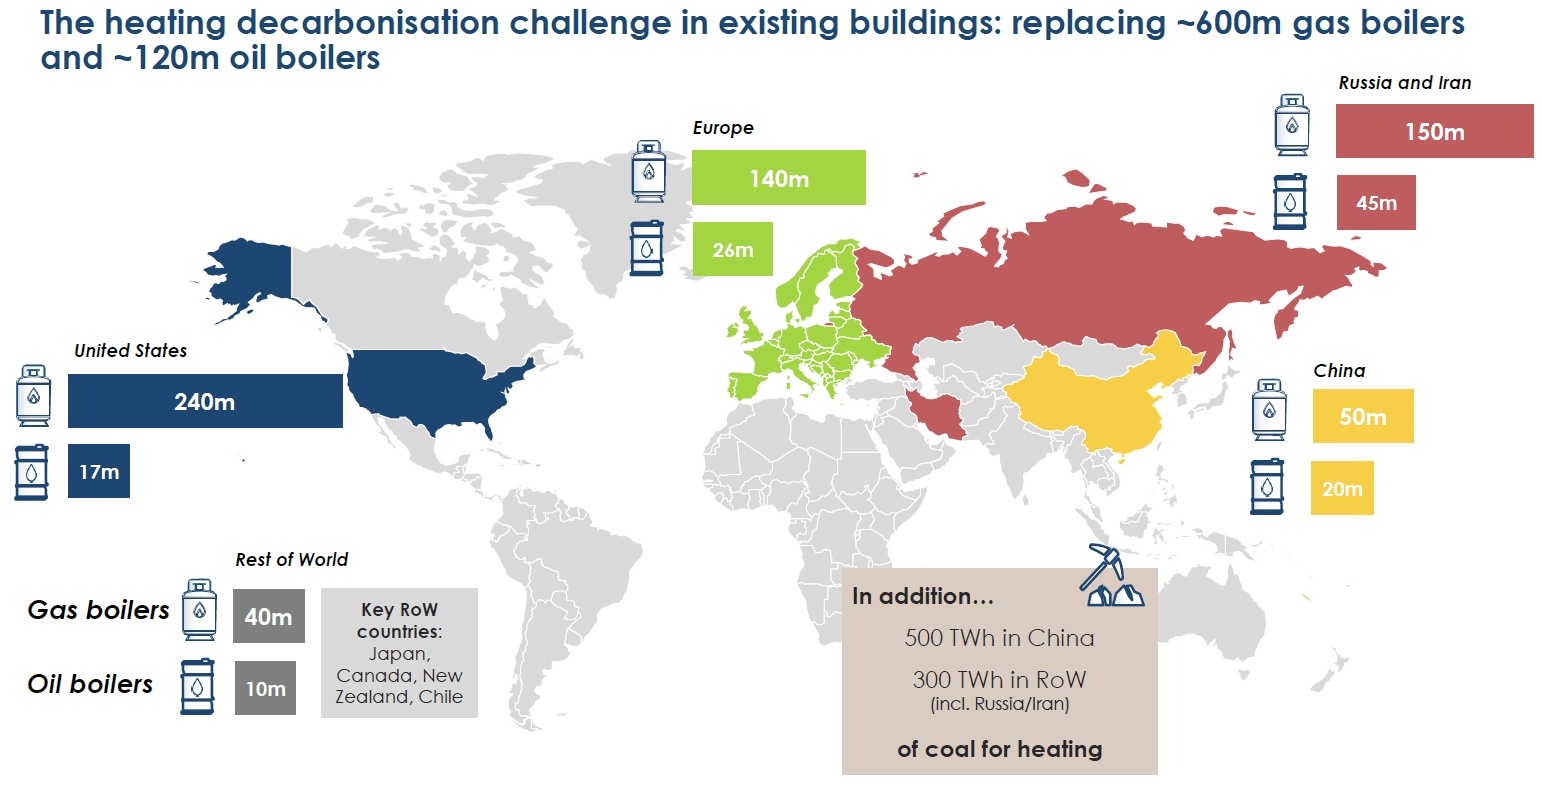 Heating decarbonisation in existing buildings